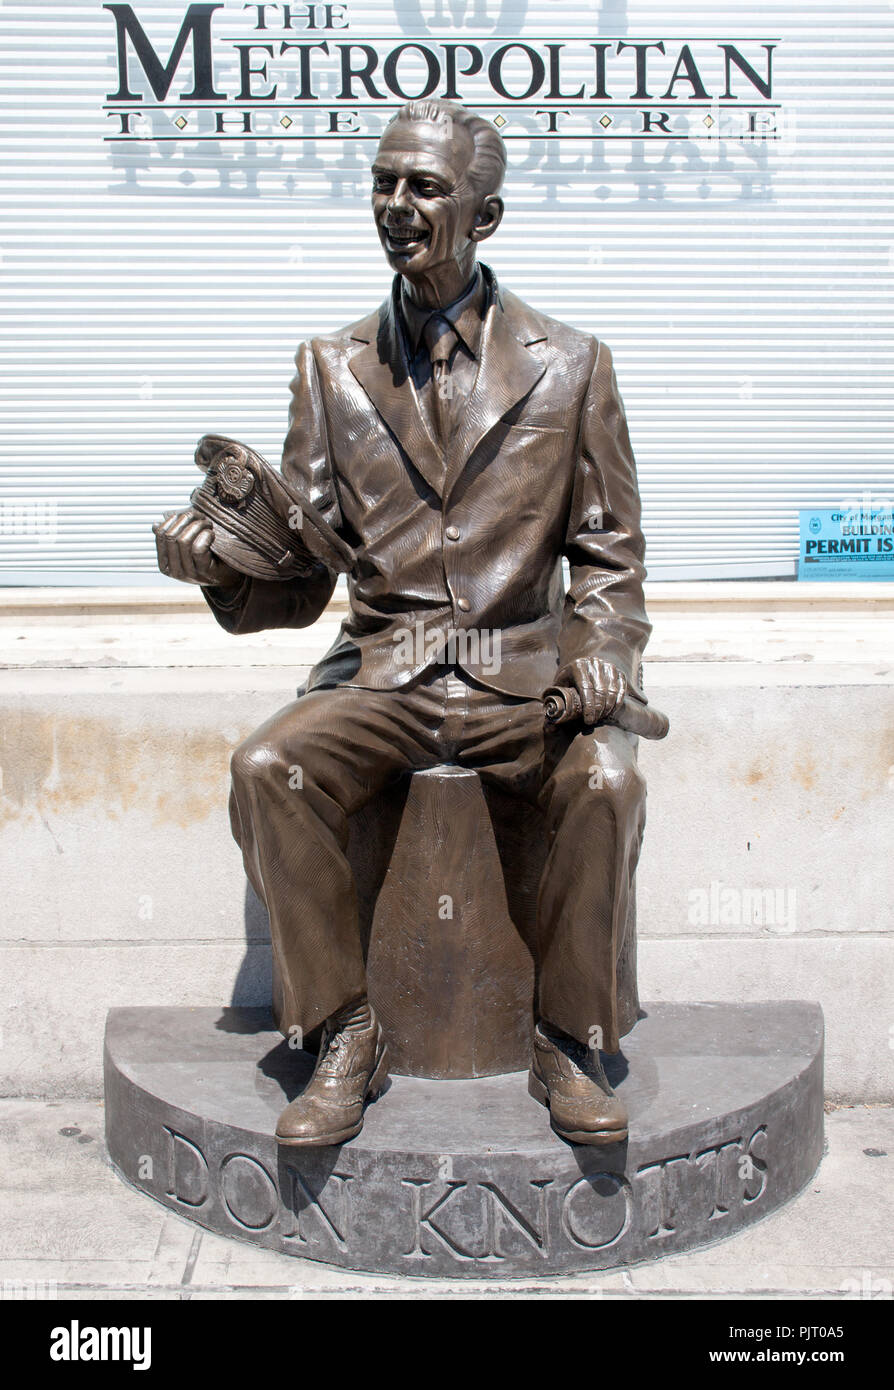 Don Knotts statue in Morgantown West Virginia Stock Photo